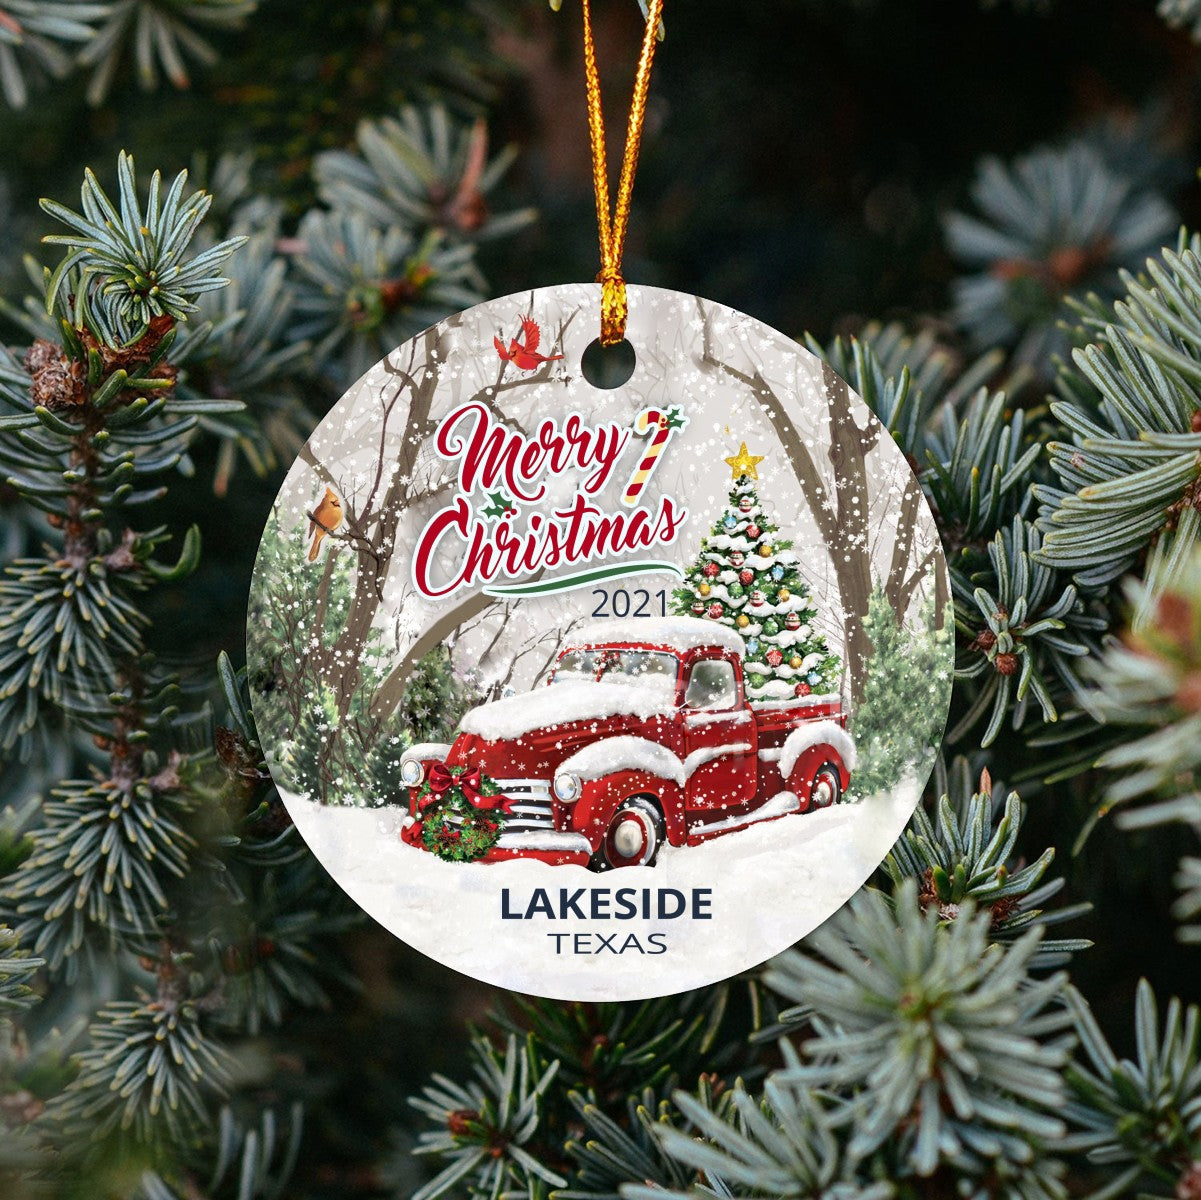 Christmas Tree Ornaments Lakeside - Ornament With Name City, State Lakeside Texas TX Ornament - Red Truck Xmas Ornaments 3'' Plastic Gift For Family, Friend And Housewarming